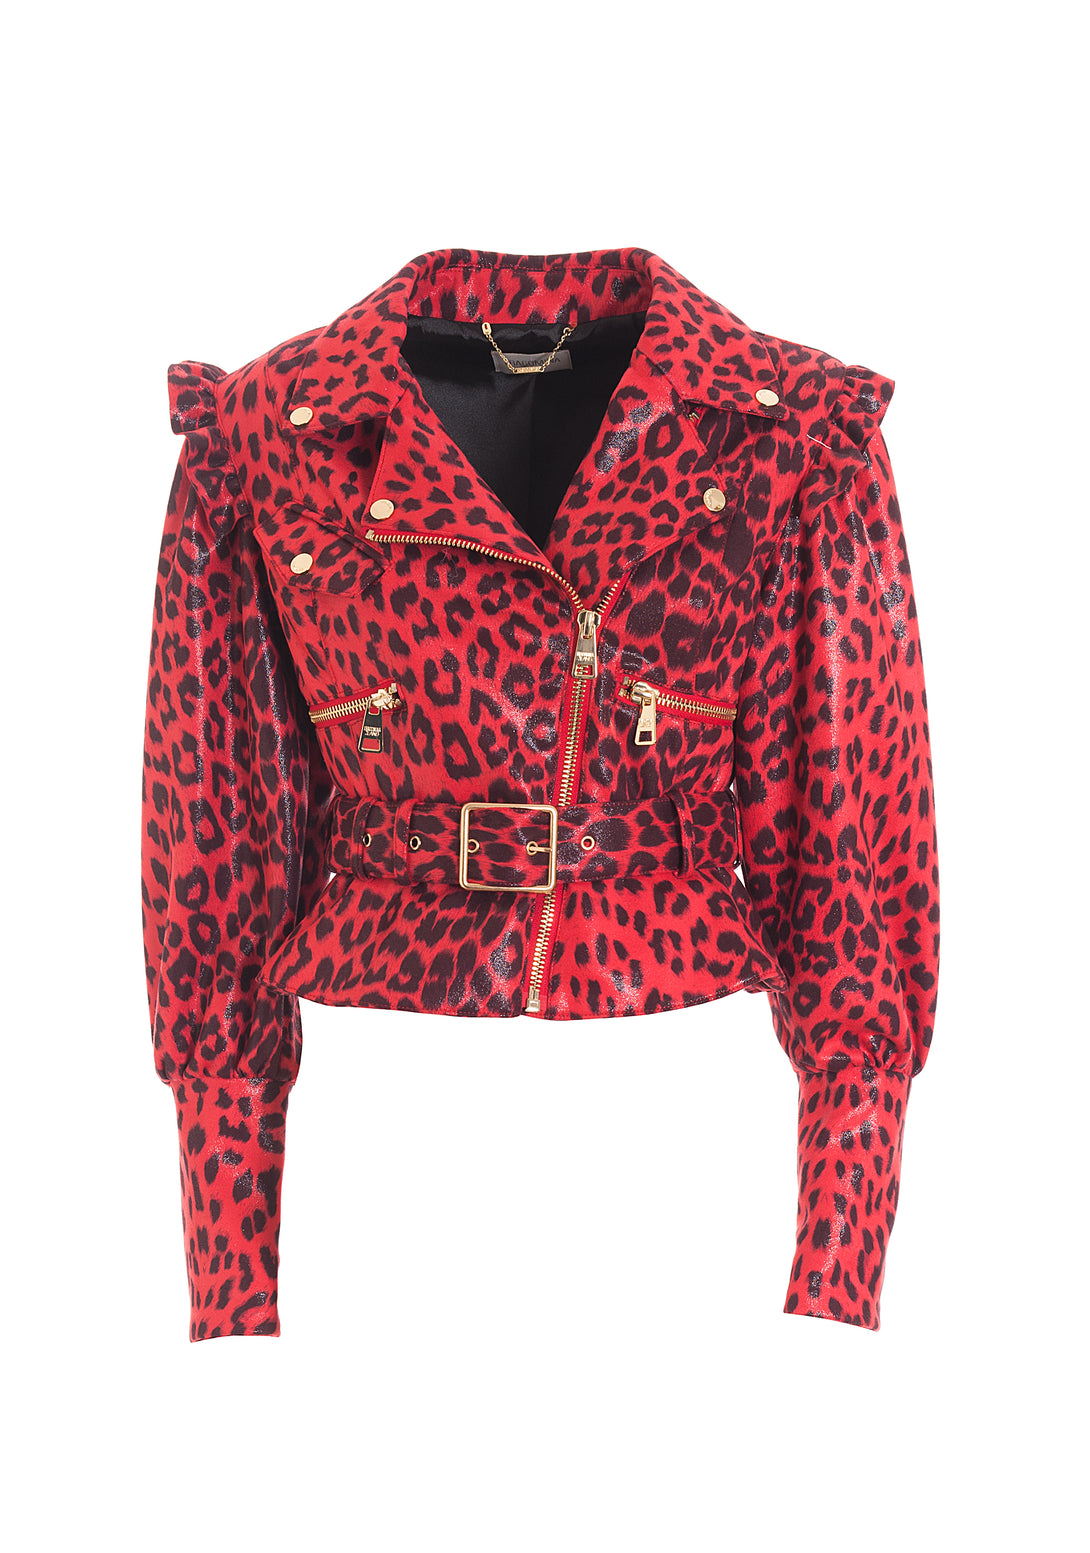 Jacket regular fit made in eco leather with animalier print